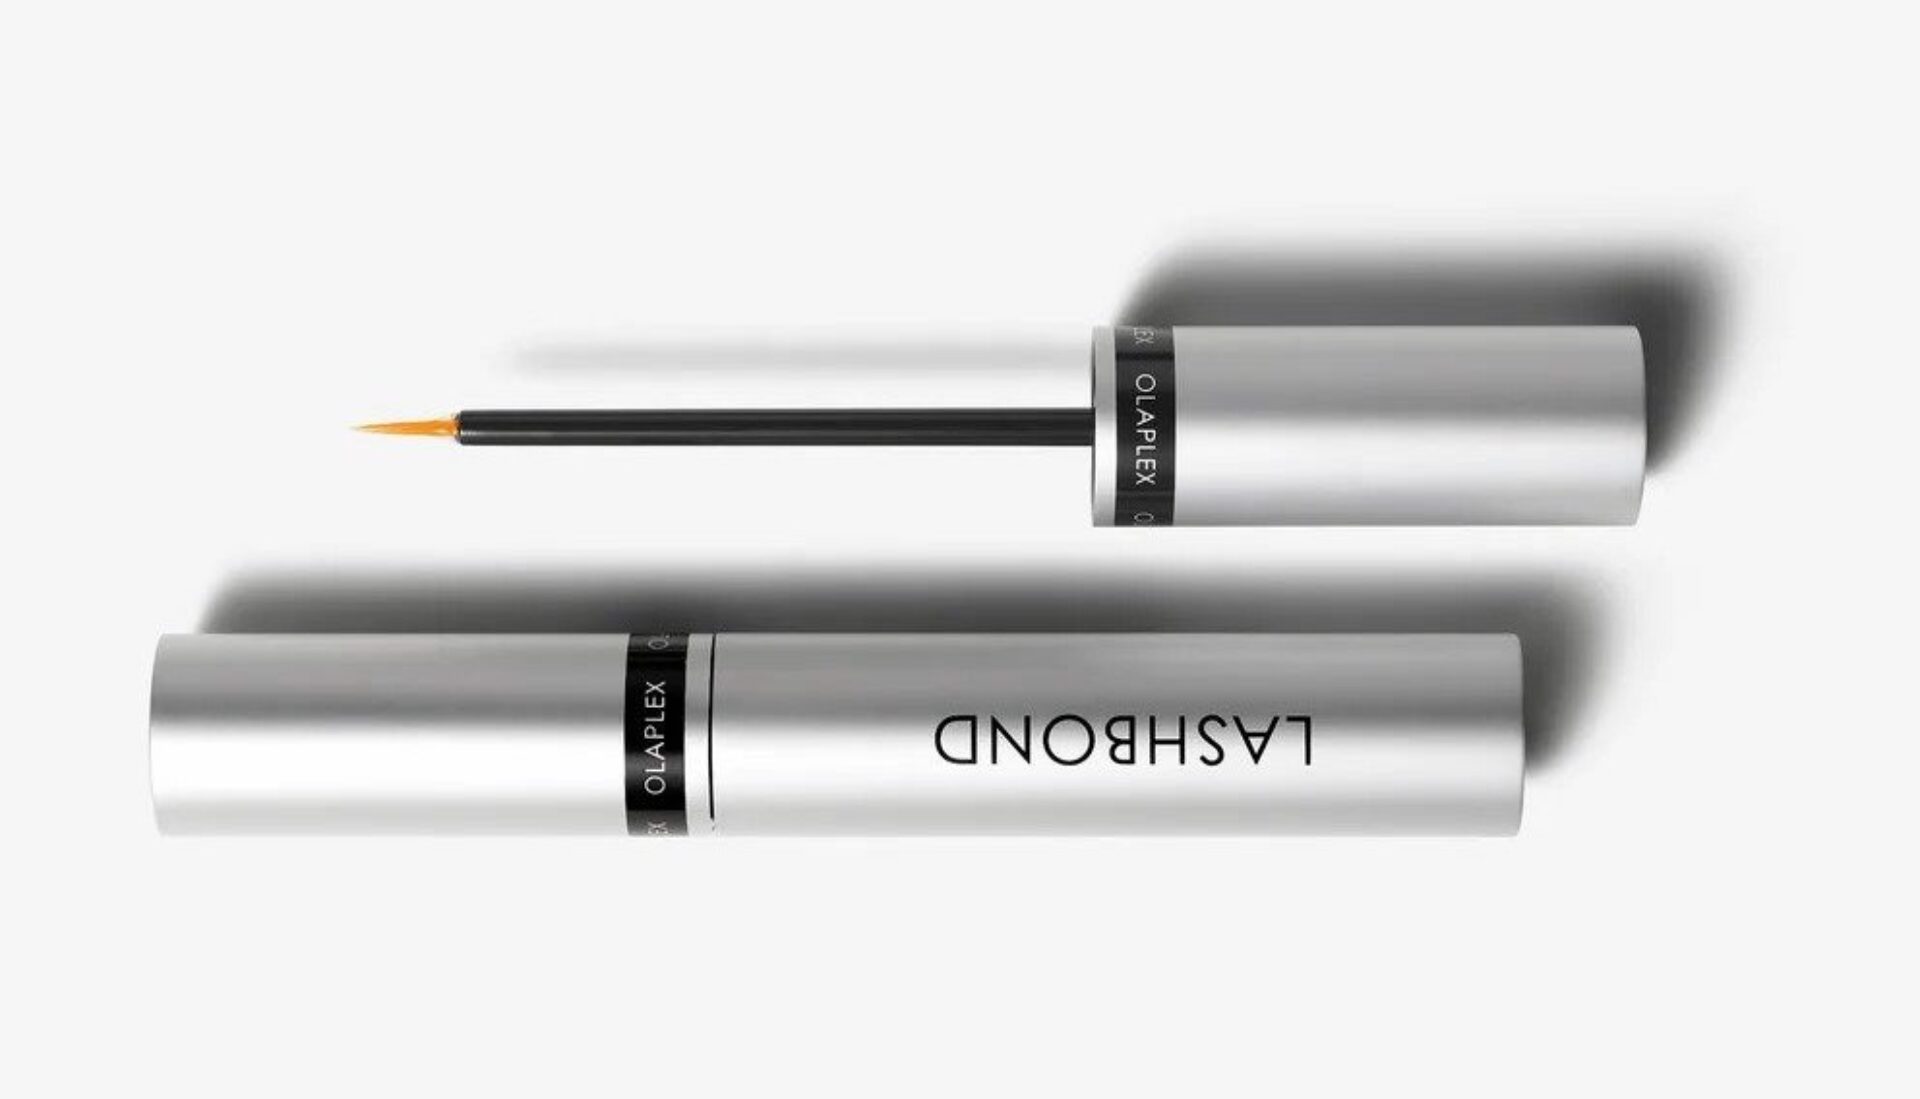 Olaplex just announced that it's dropping its very first eyelash growth product, the Lashbond Serum. This new Lash serum also contains Olaplex's signature bond-building formula and will be available in stores starting March 31.